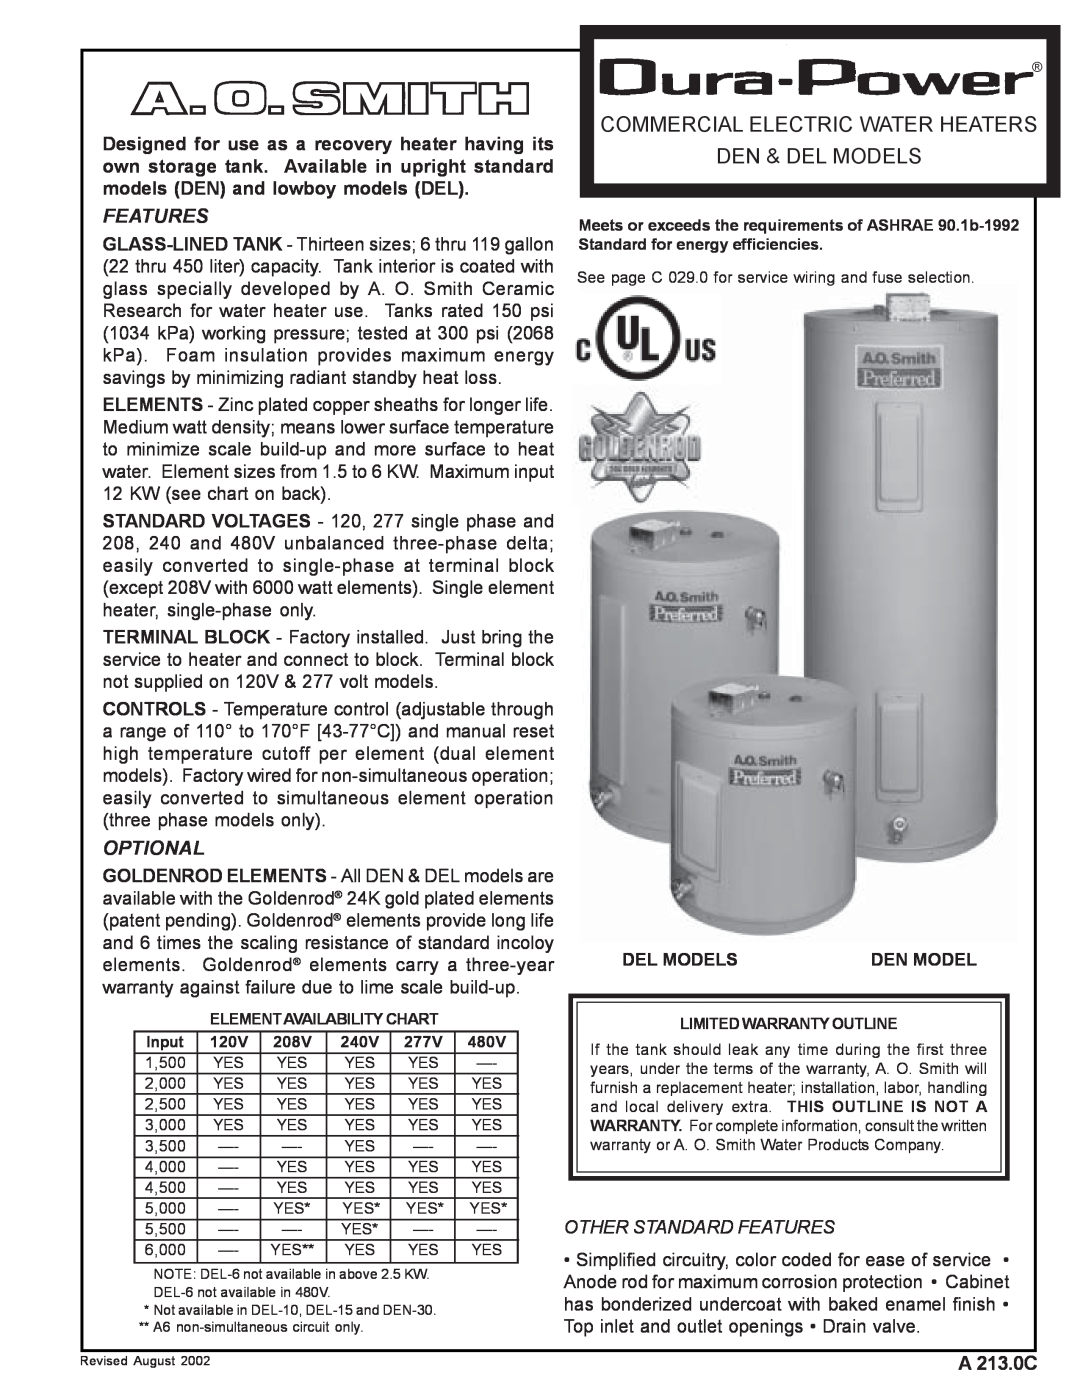 A.O. Smith warranty A 213.0C, Commercial Electric Water Heaters Den & Del Models, Features, Optional 